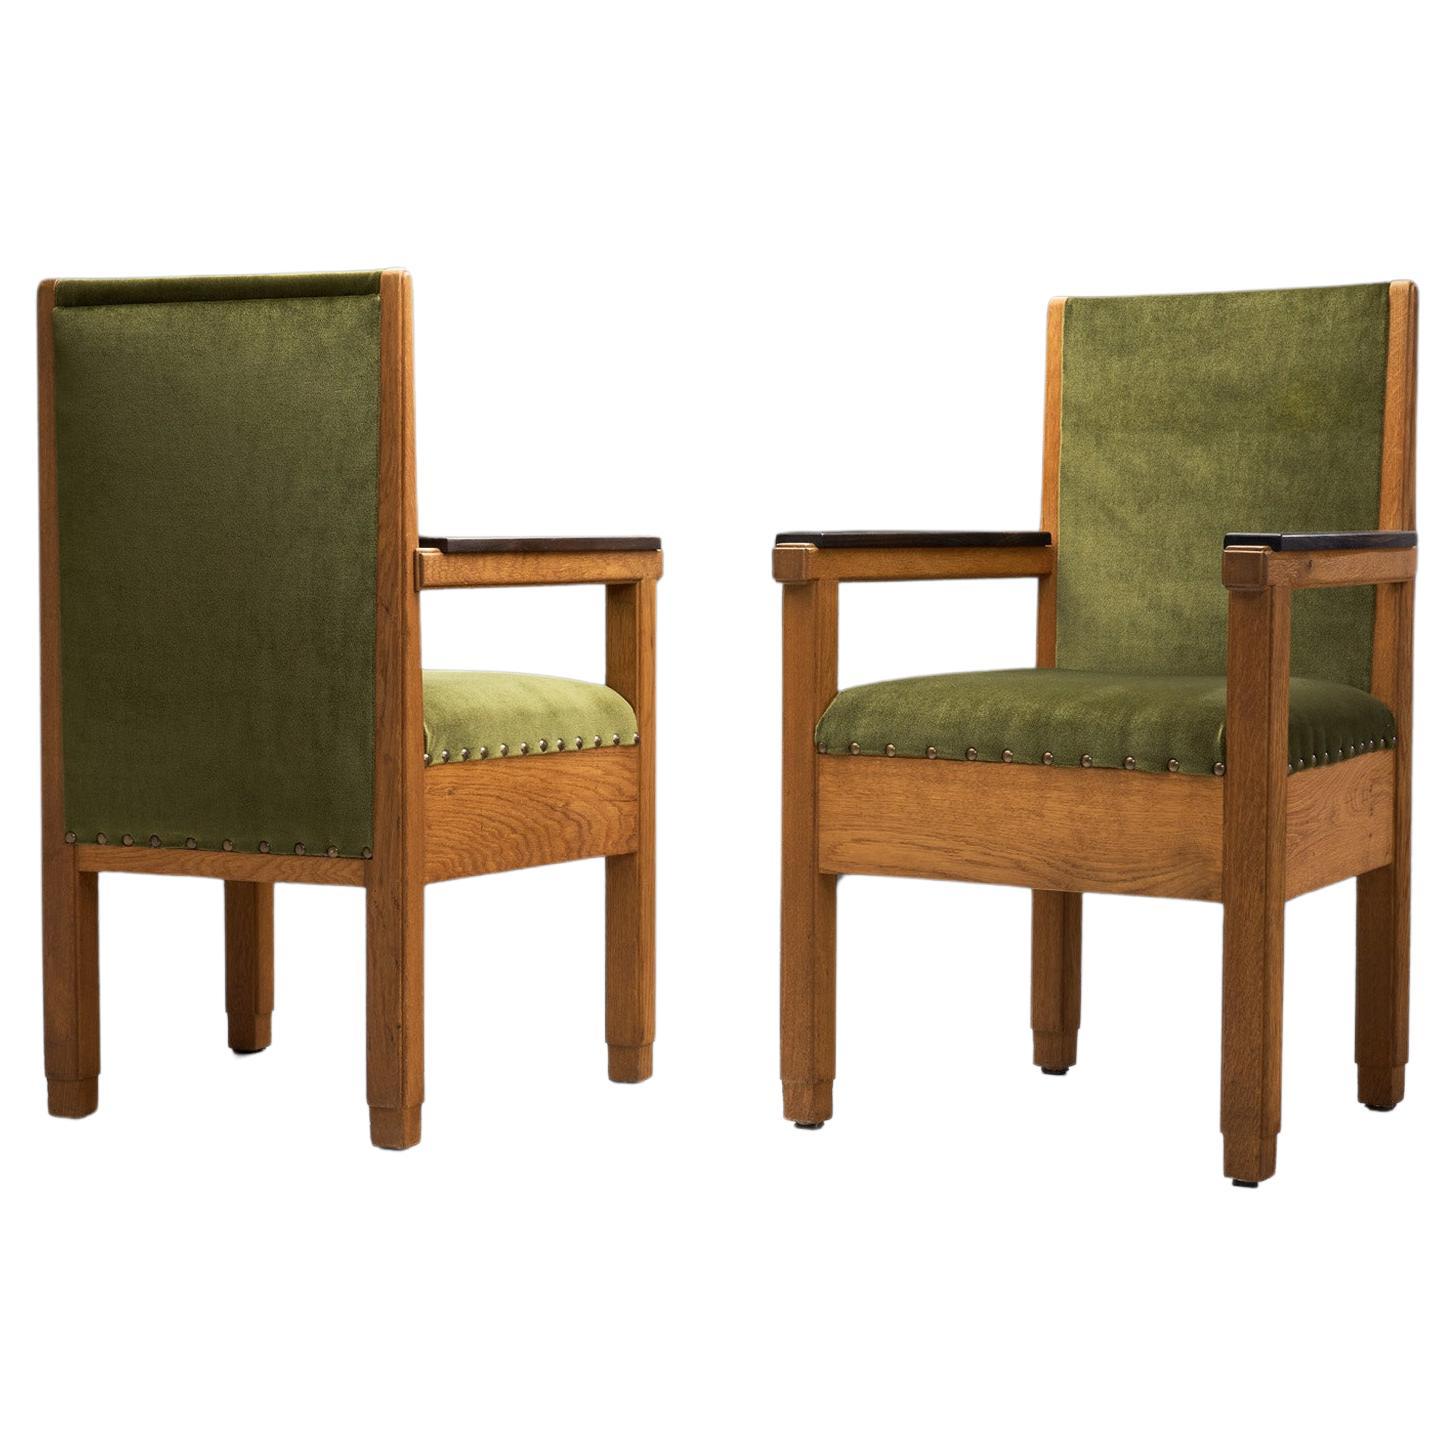 Upholstered Amsterdamse School Chairs, The Netherlands Early 20th Century